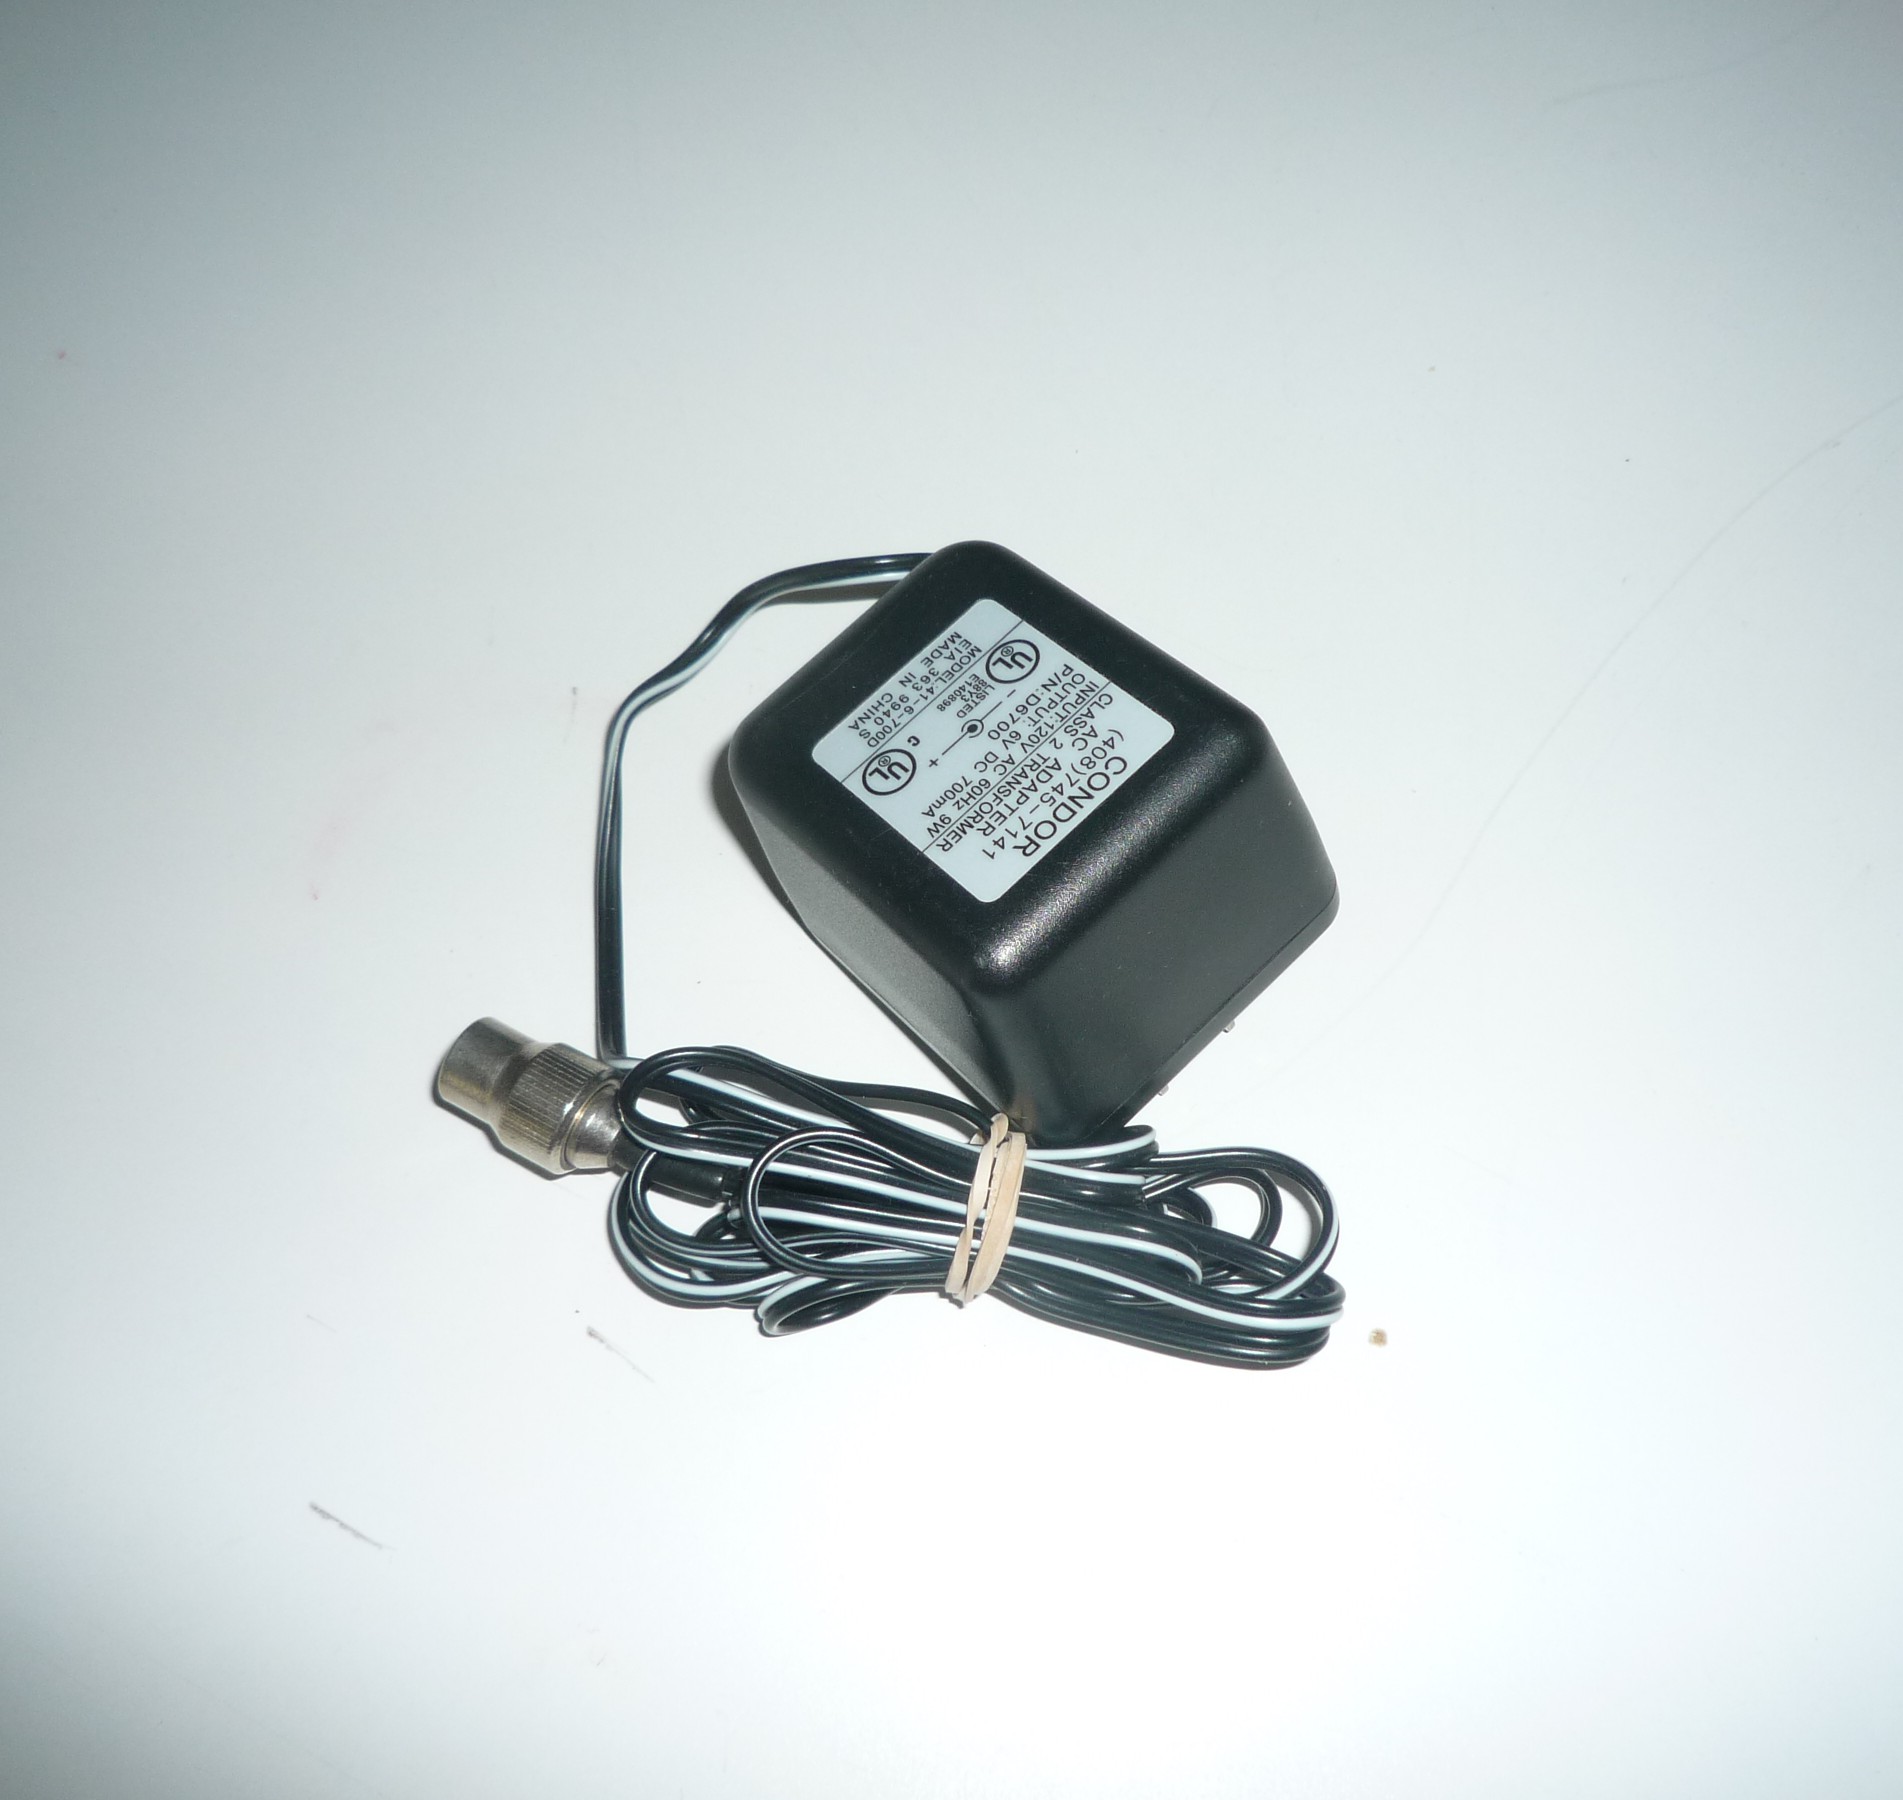 AC Power adapter for Kern optical theodolites DKM2-A, K1-S and K1-M